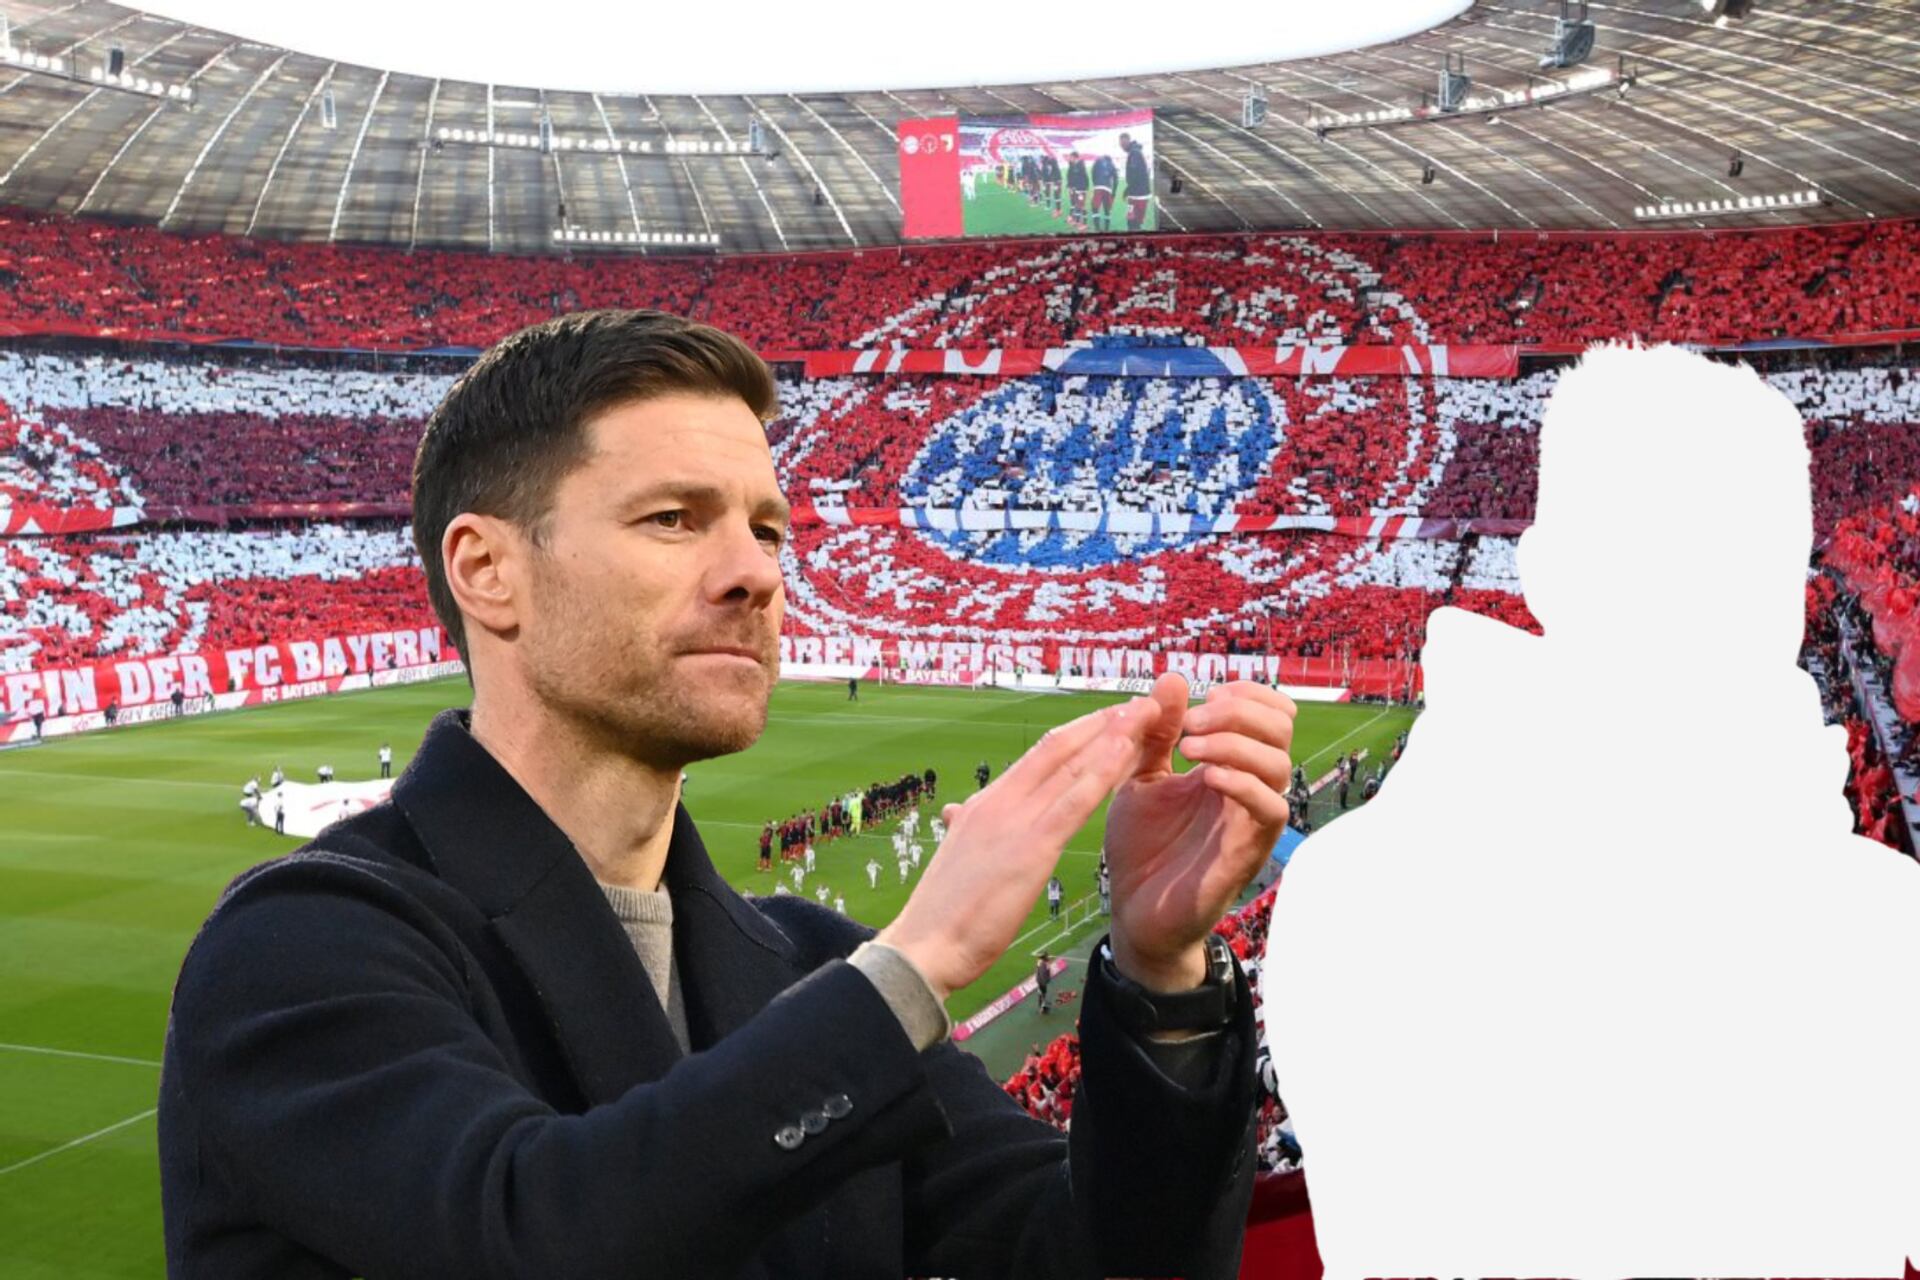 As Xabi Alonso could stay at Leverkusen, this is Bayern's second choice